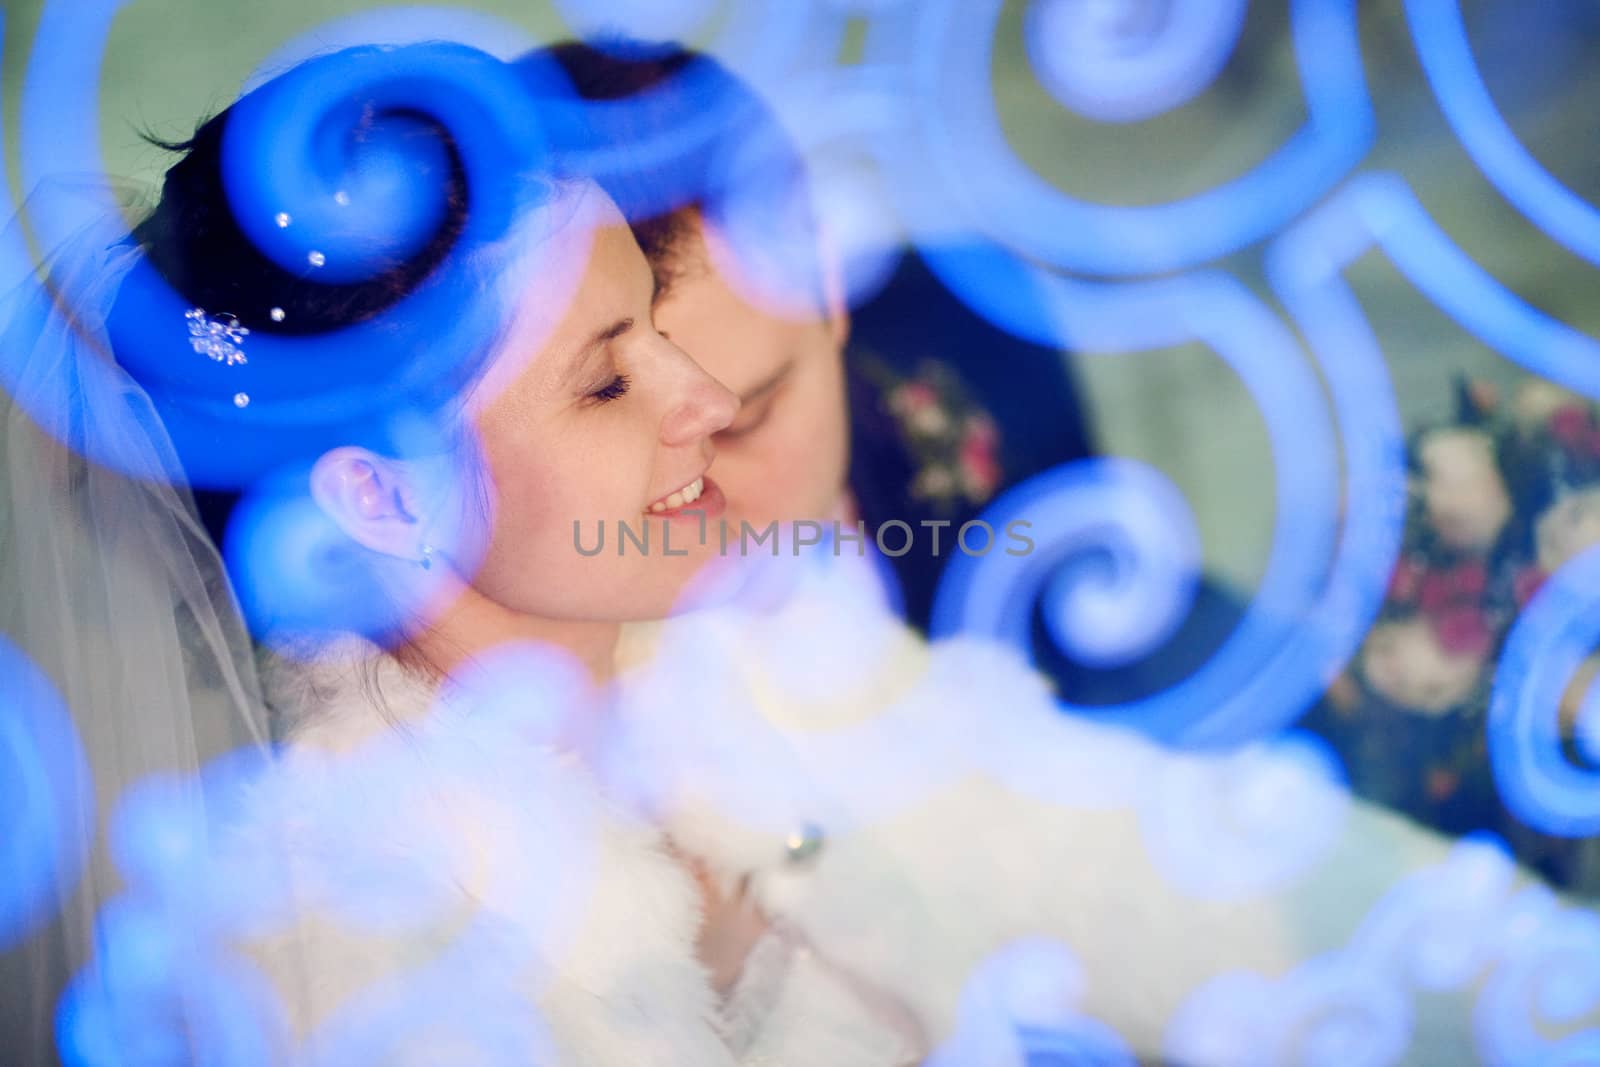 bride with closed eyes and groom through the ornate glass